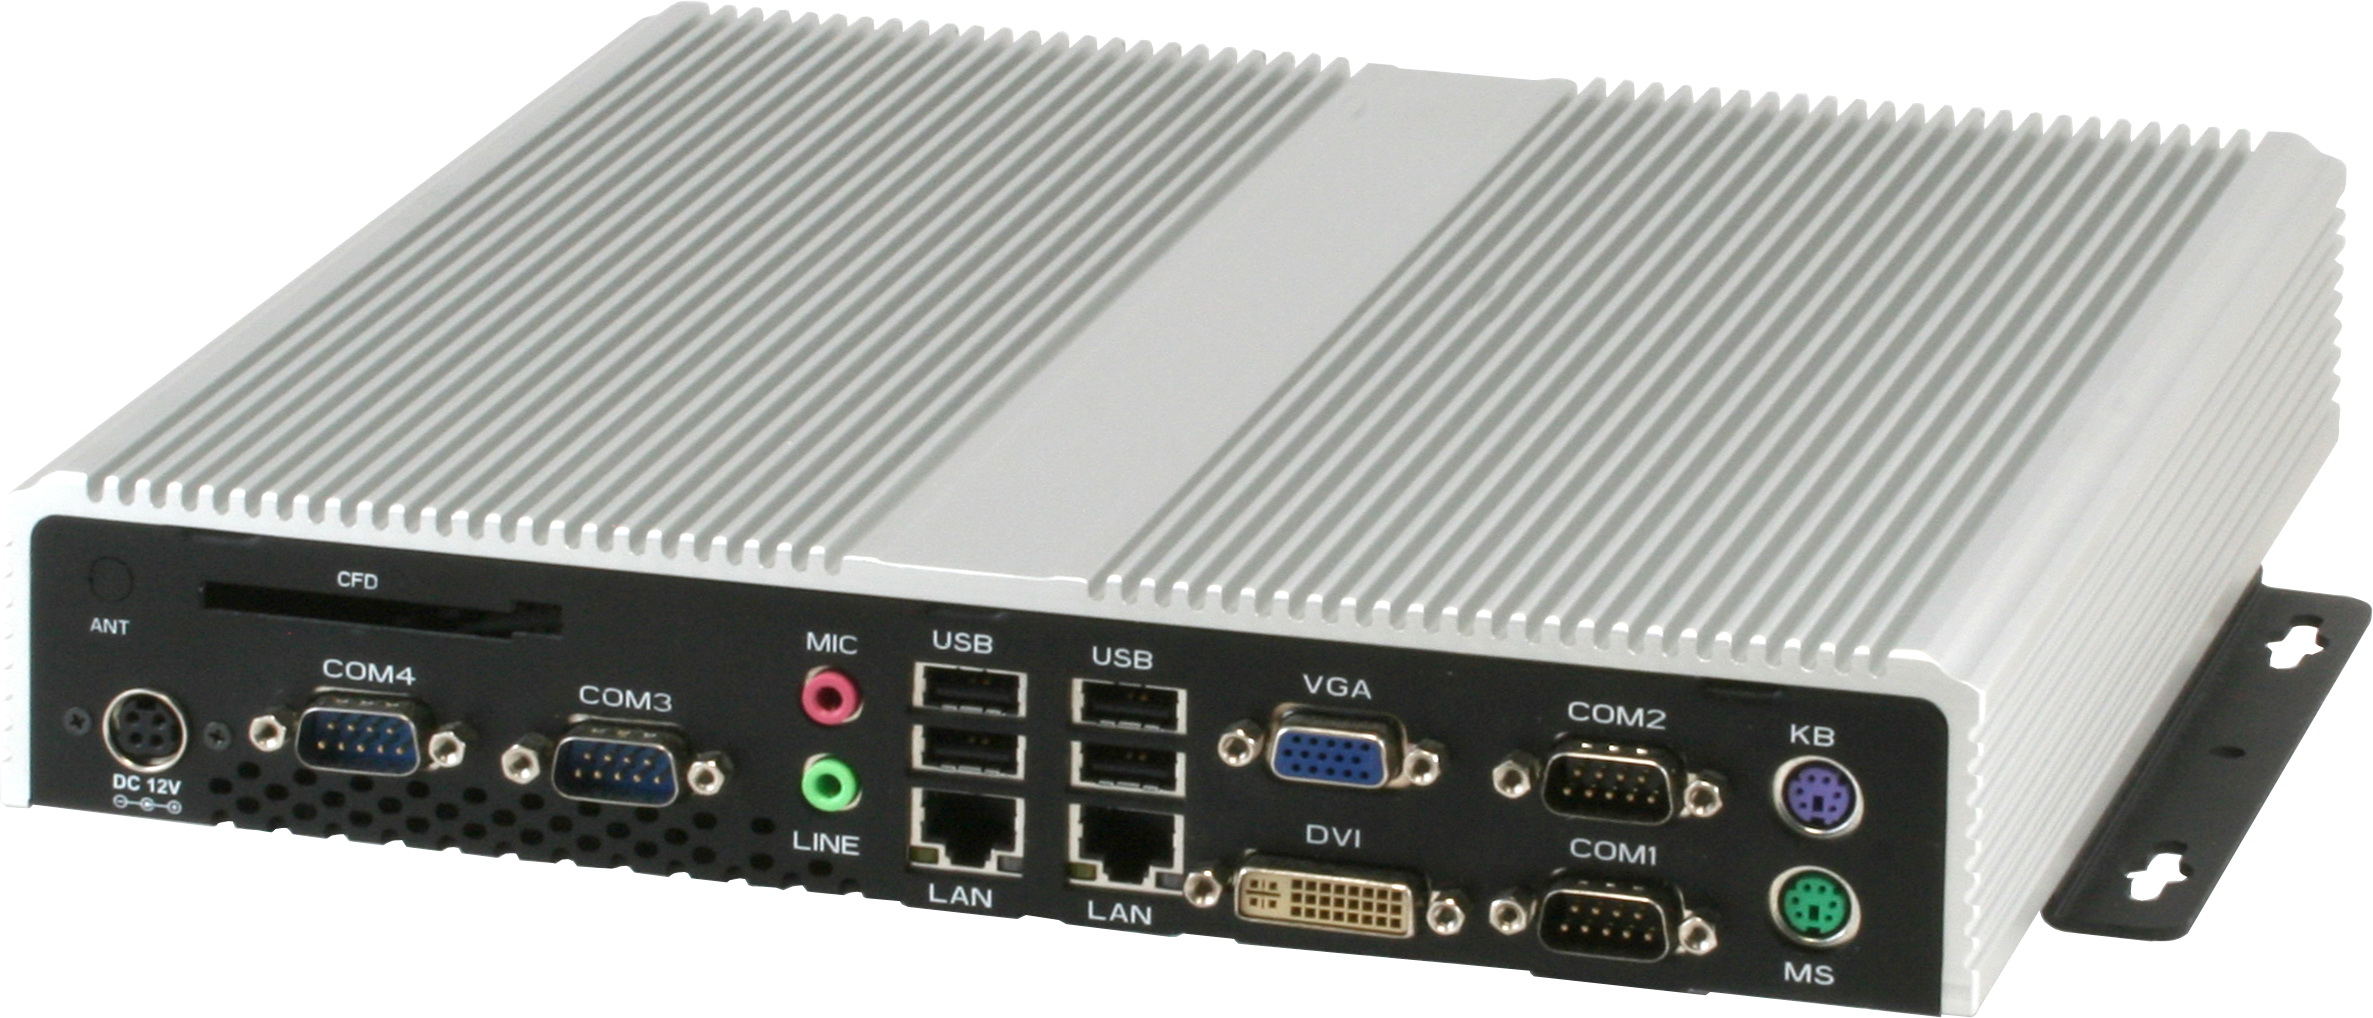 AAEON,  Eco-Friendly, Embedded Controller, GES-3300F, Embedded Computing